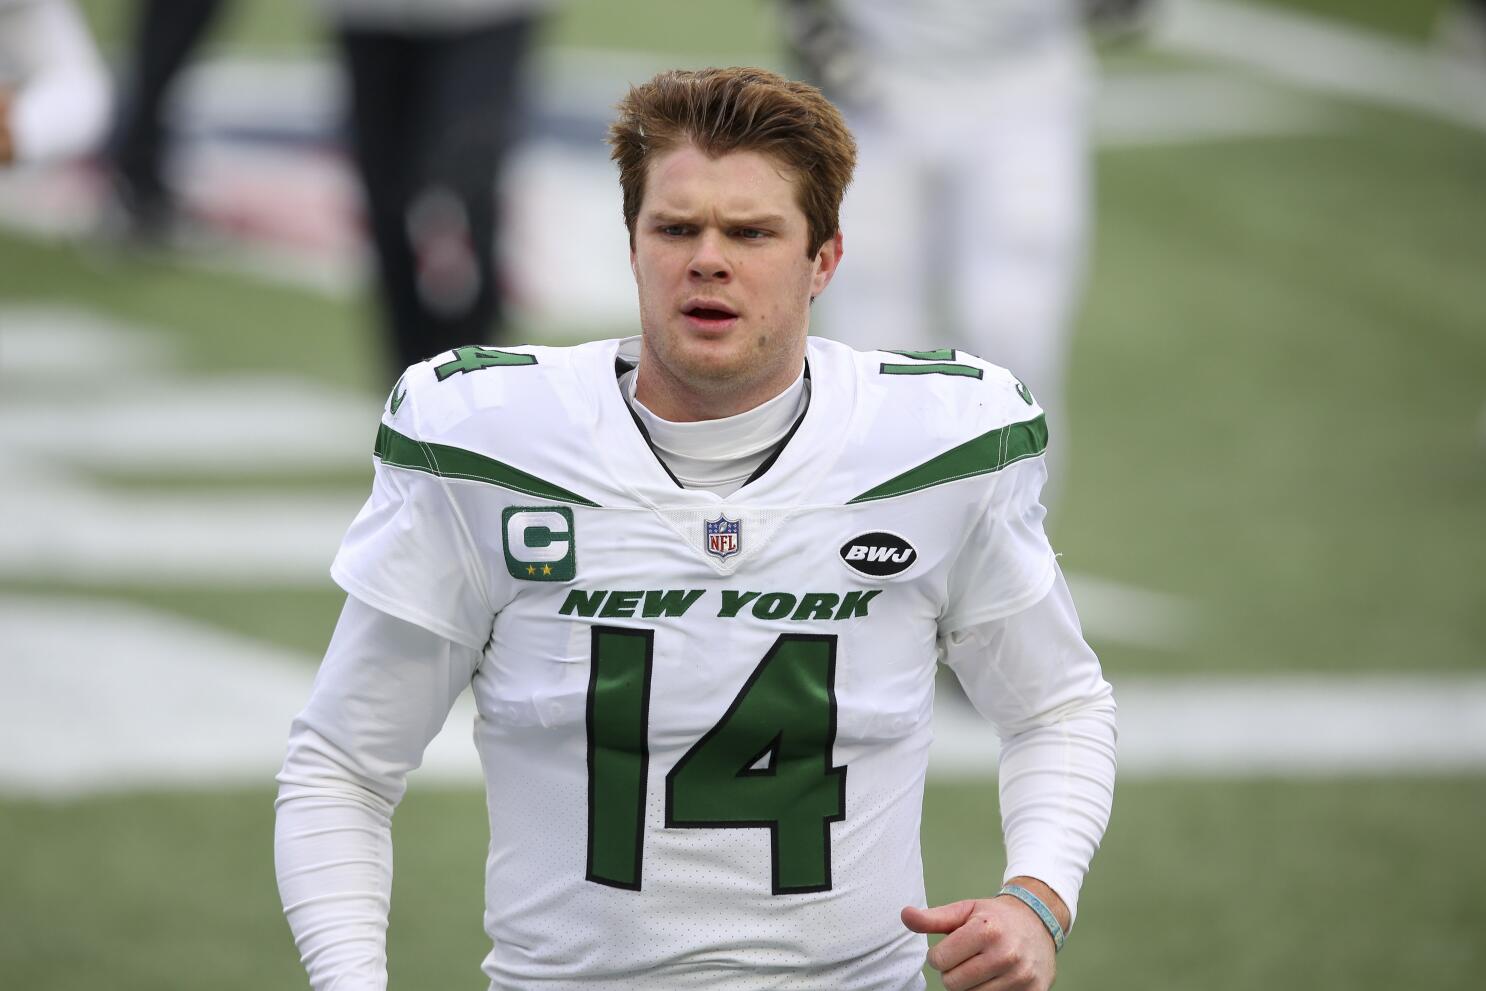 QB Sam Darnold excited to be where he's 'wanted' in Carolina - The San Diego Union-Tribune